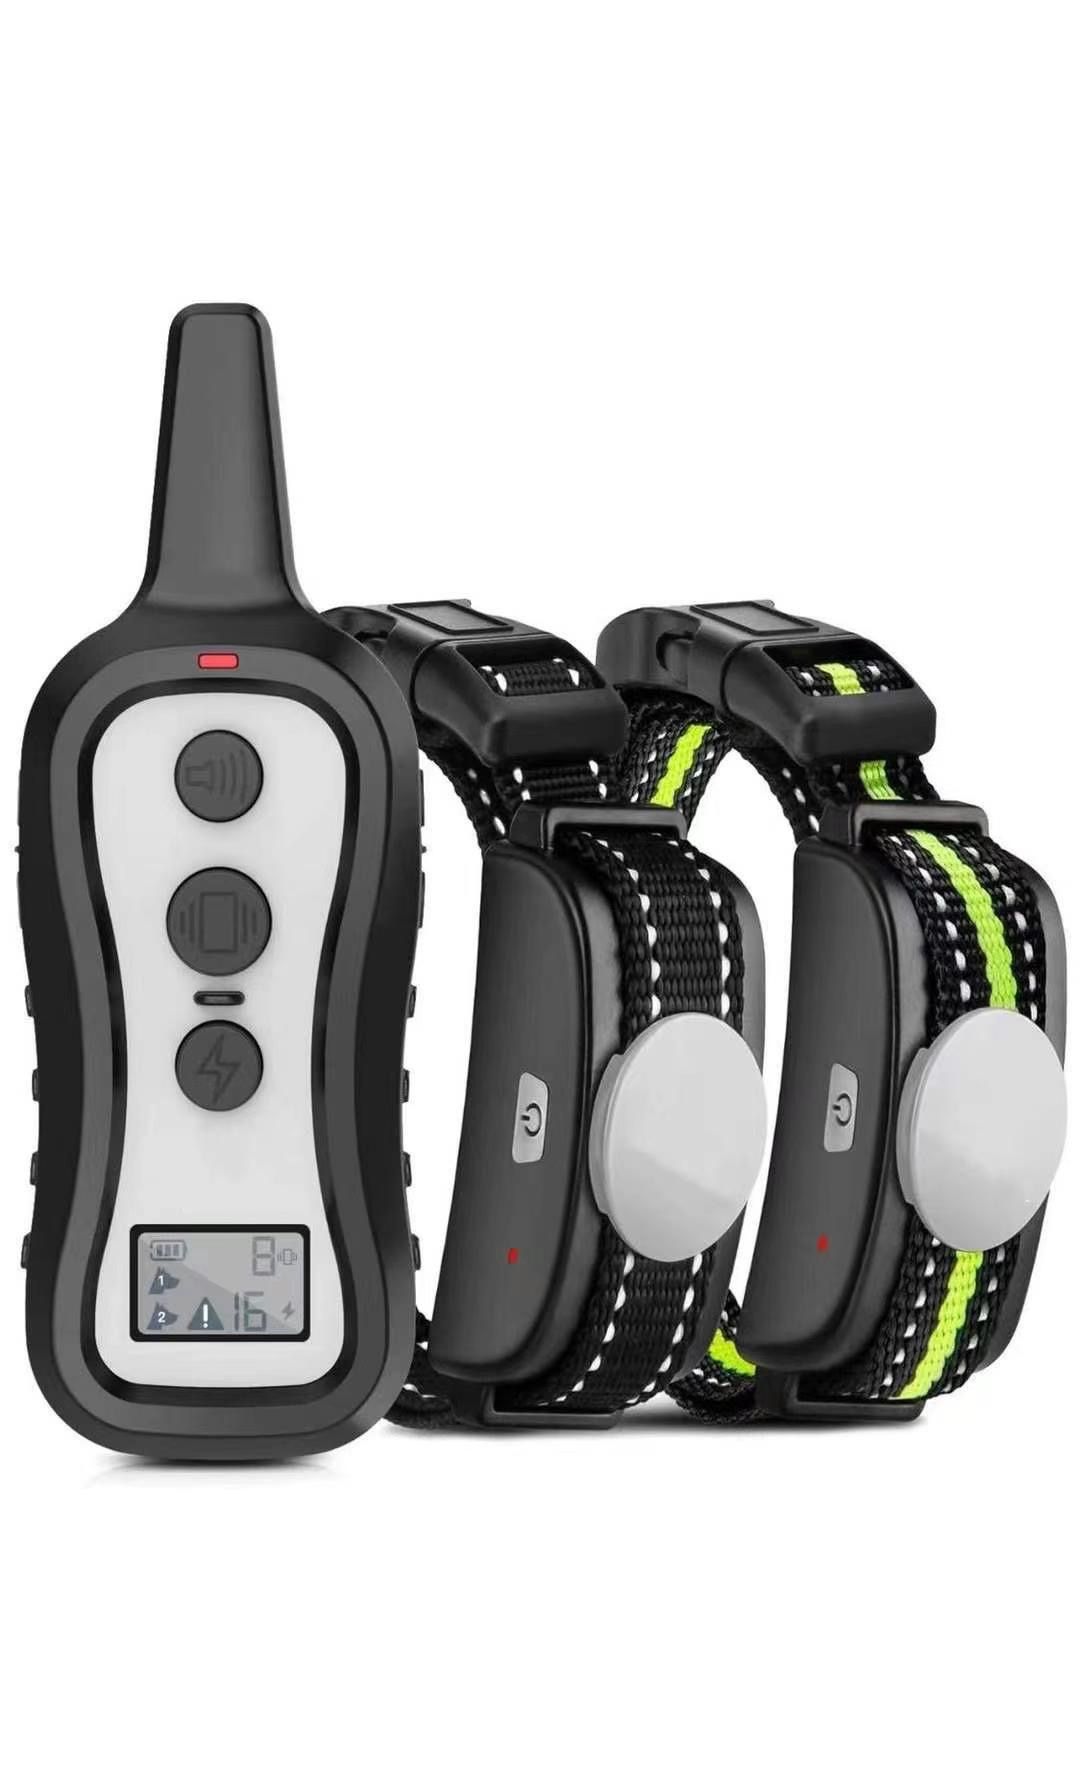 Dog Training Collar with 2 Receivers, Shock Collars for Dogs with Remote, Dog Shock Collar with Beep Vibration Shock for Small Medium Large 2 Dogs(15-